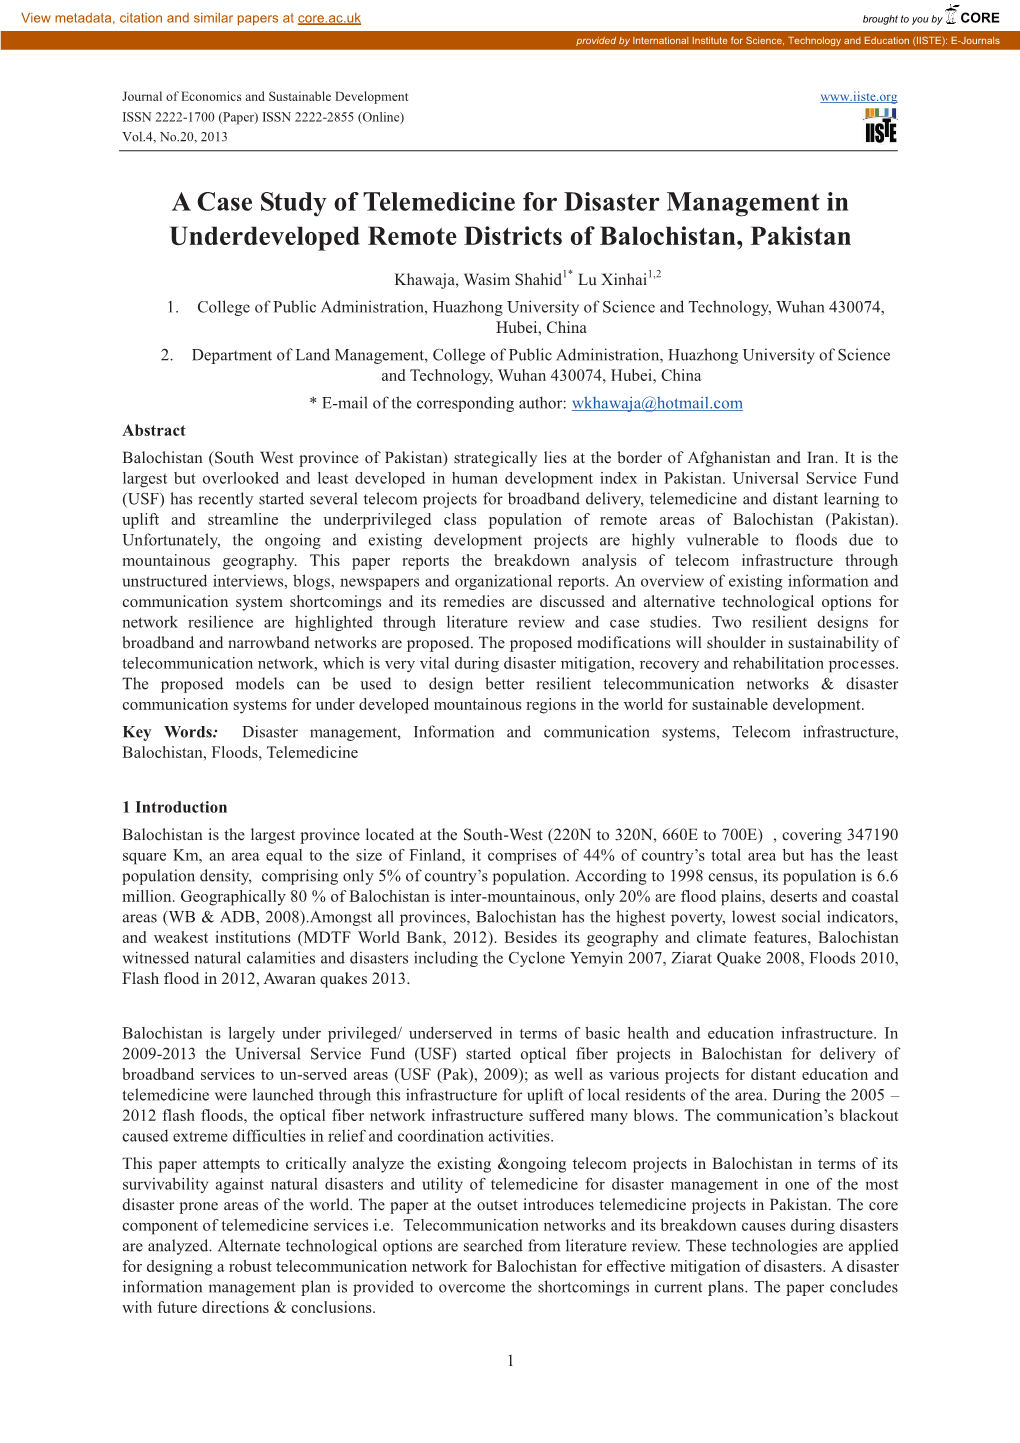 A Case Study of Telemedicine for Disaster Management in Underdeveloped Remote Districts of Balochistan, Pakistan